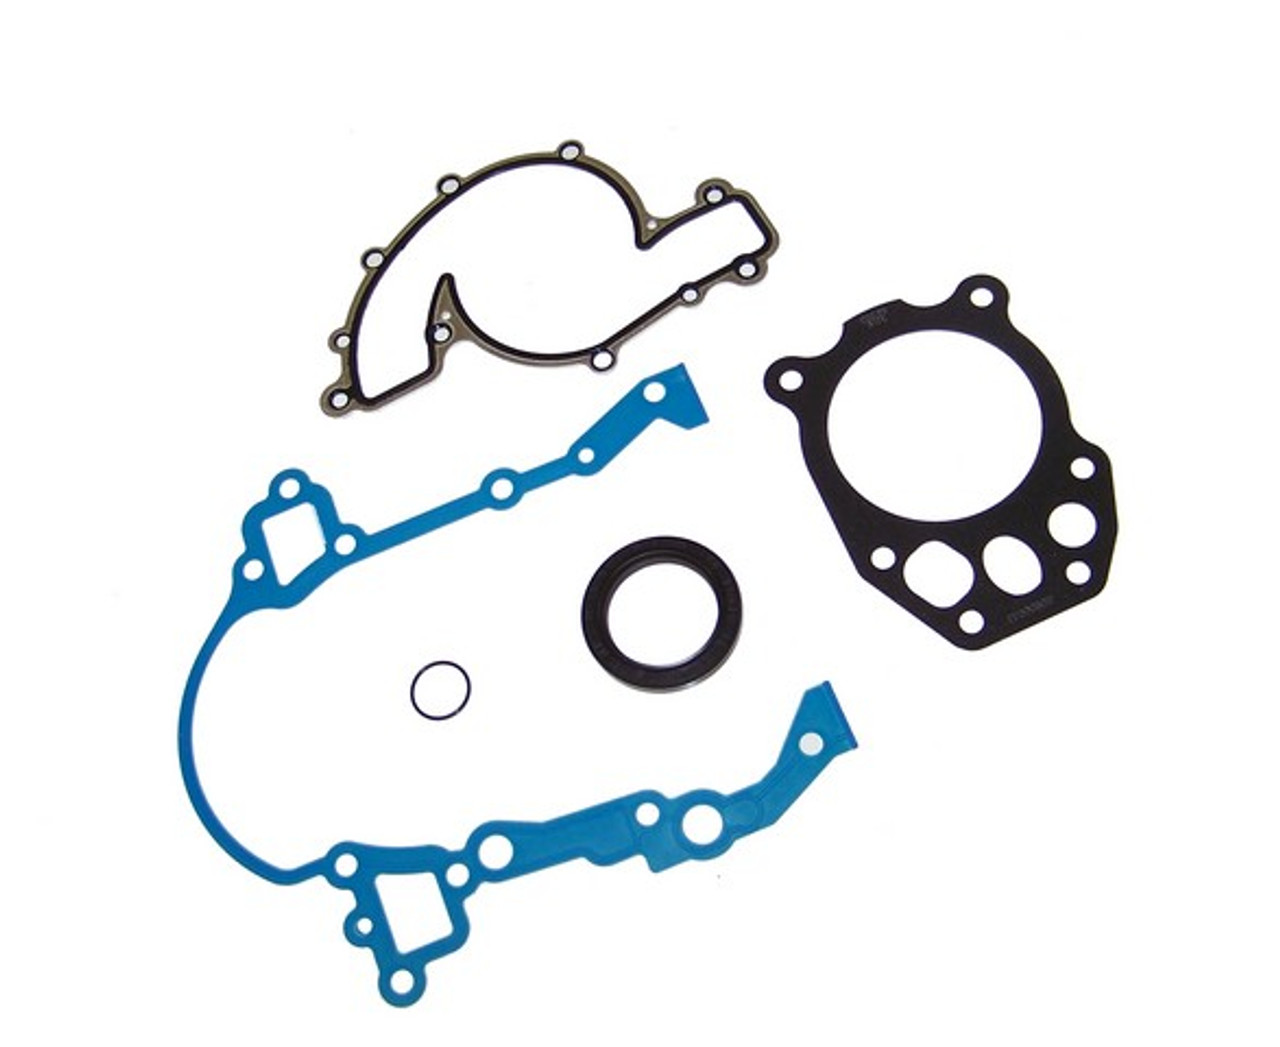 2007 Buick LaCrosse 3.8L Timing Cover Gasket Set